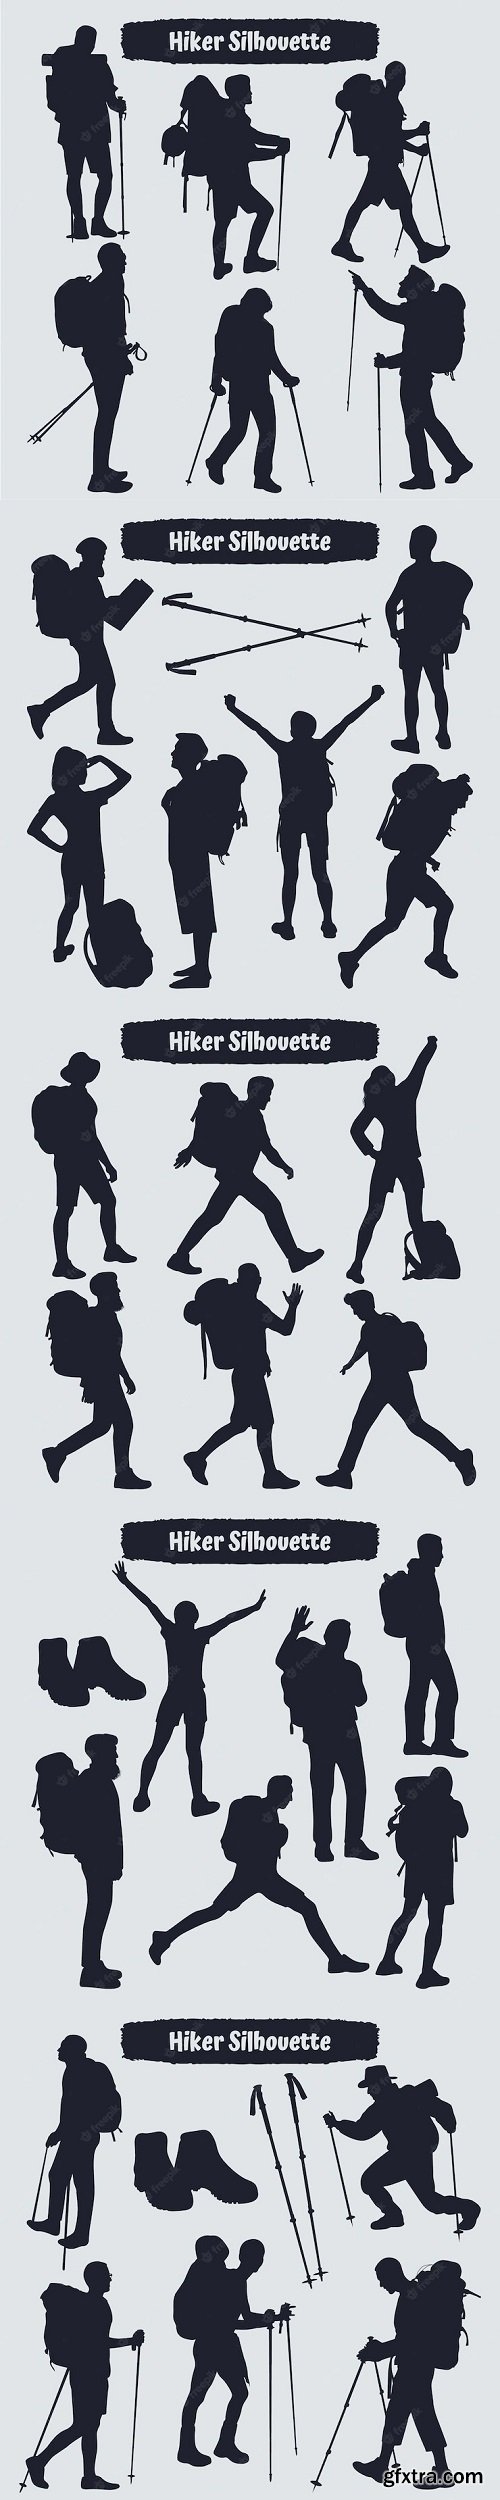 Collection of hiker in mountains silhouettes in different poses